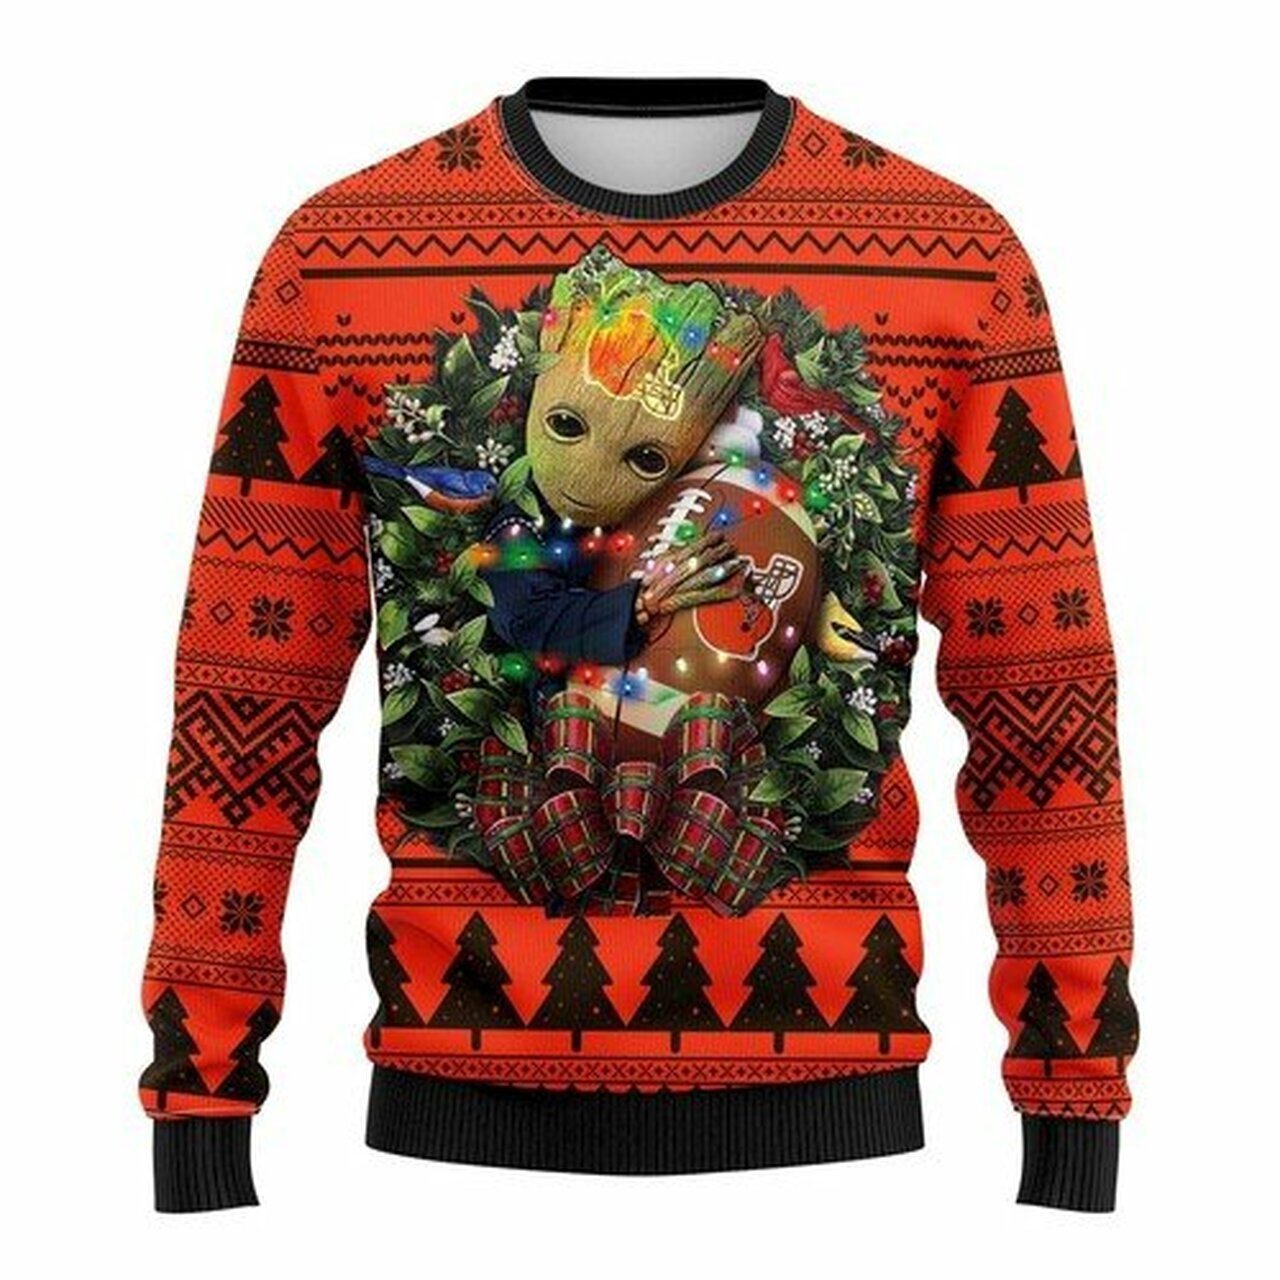 [ COOL ] NFL Cleveland Browns Groot hug ugly christmas sweater – Saleoff 311221